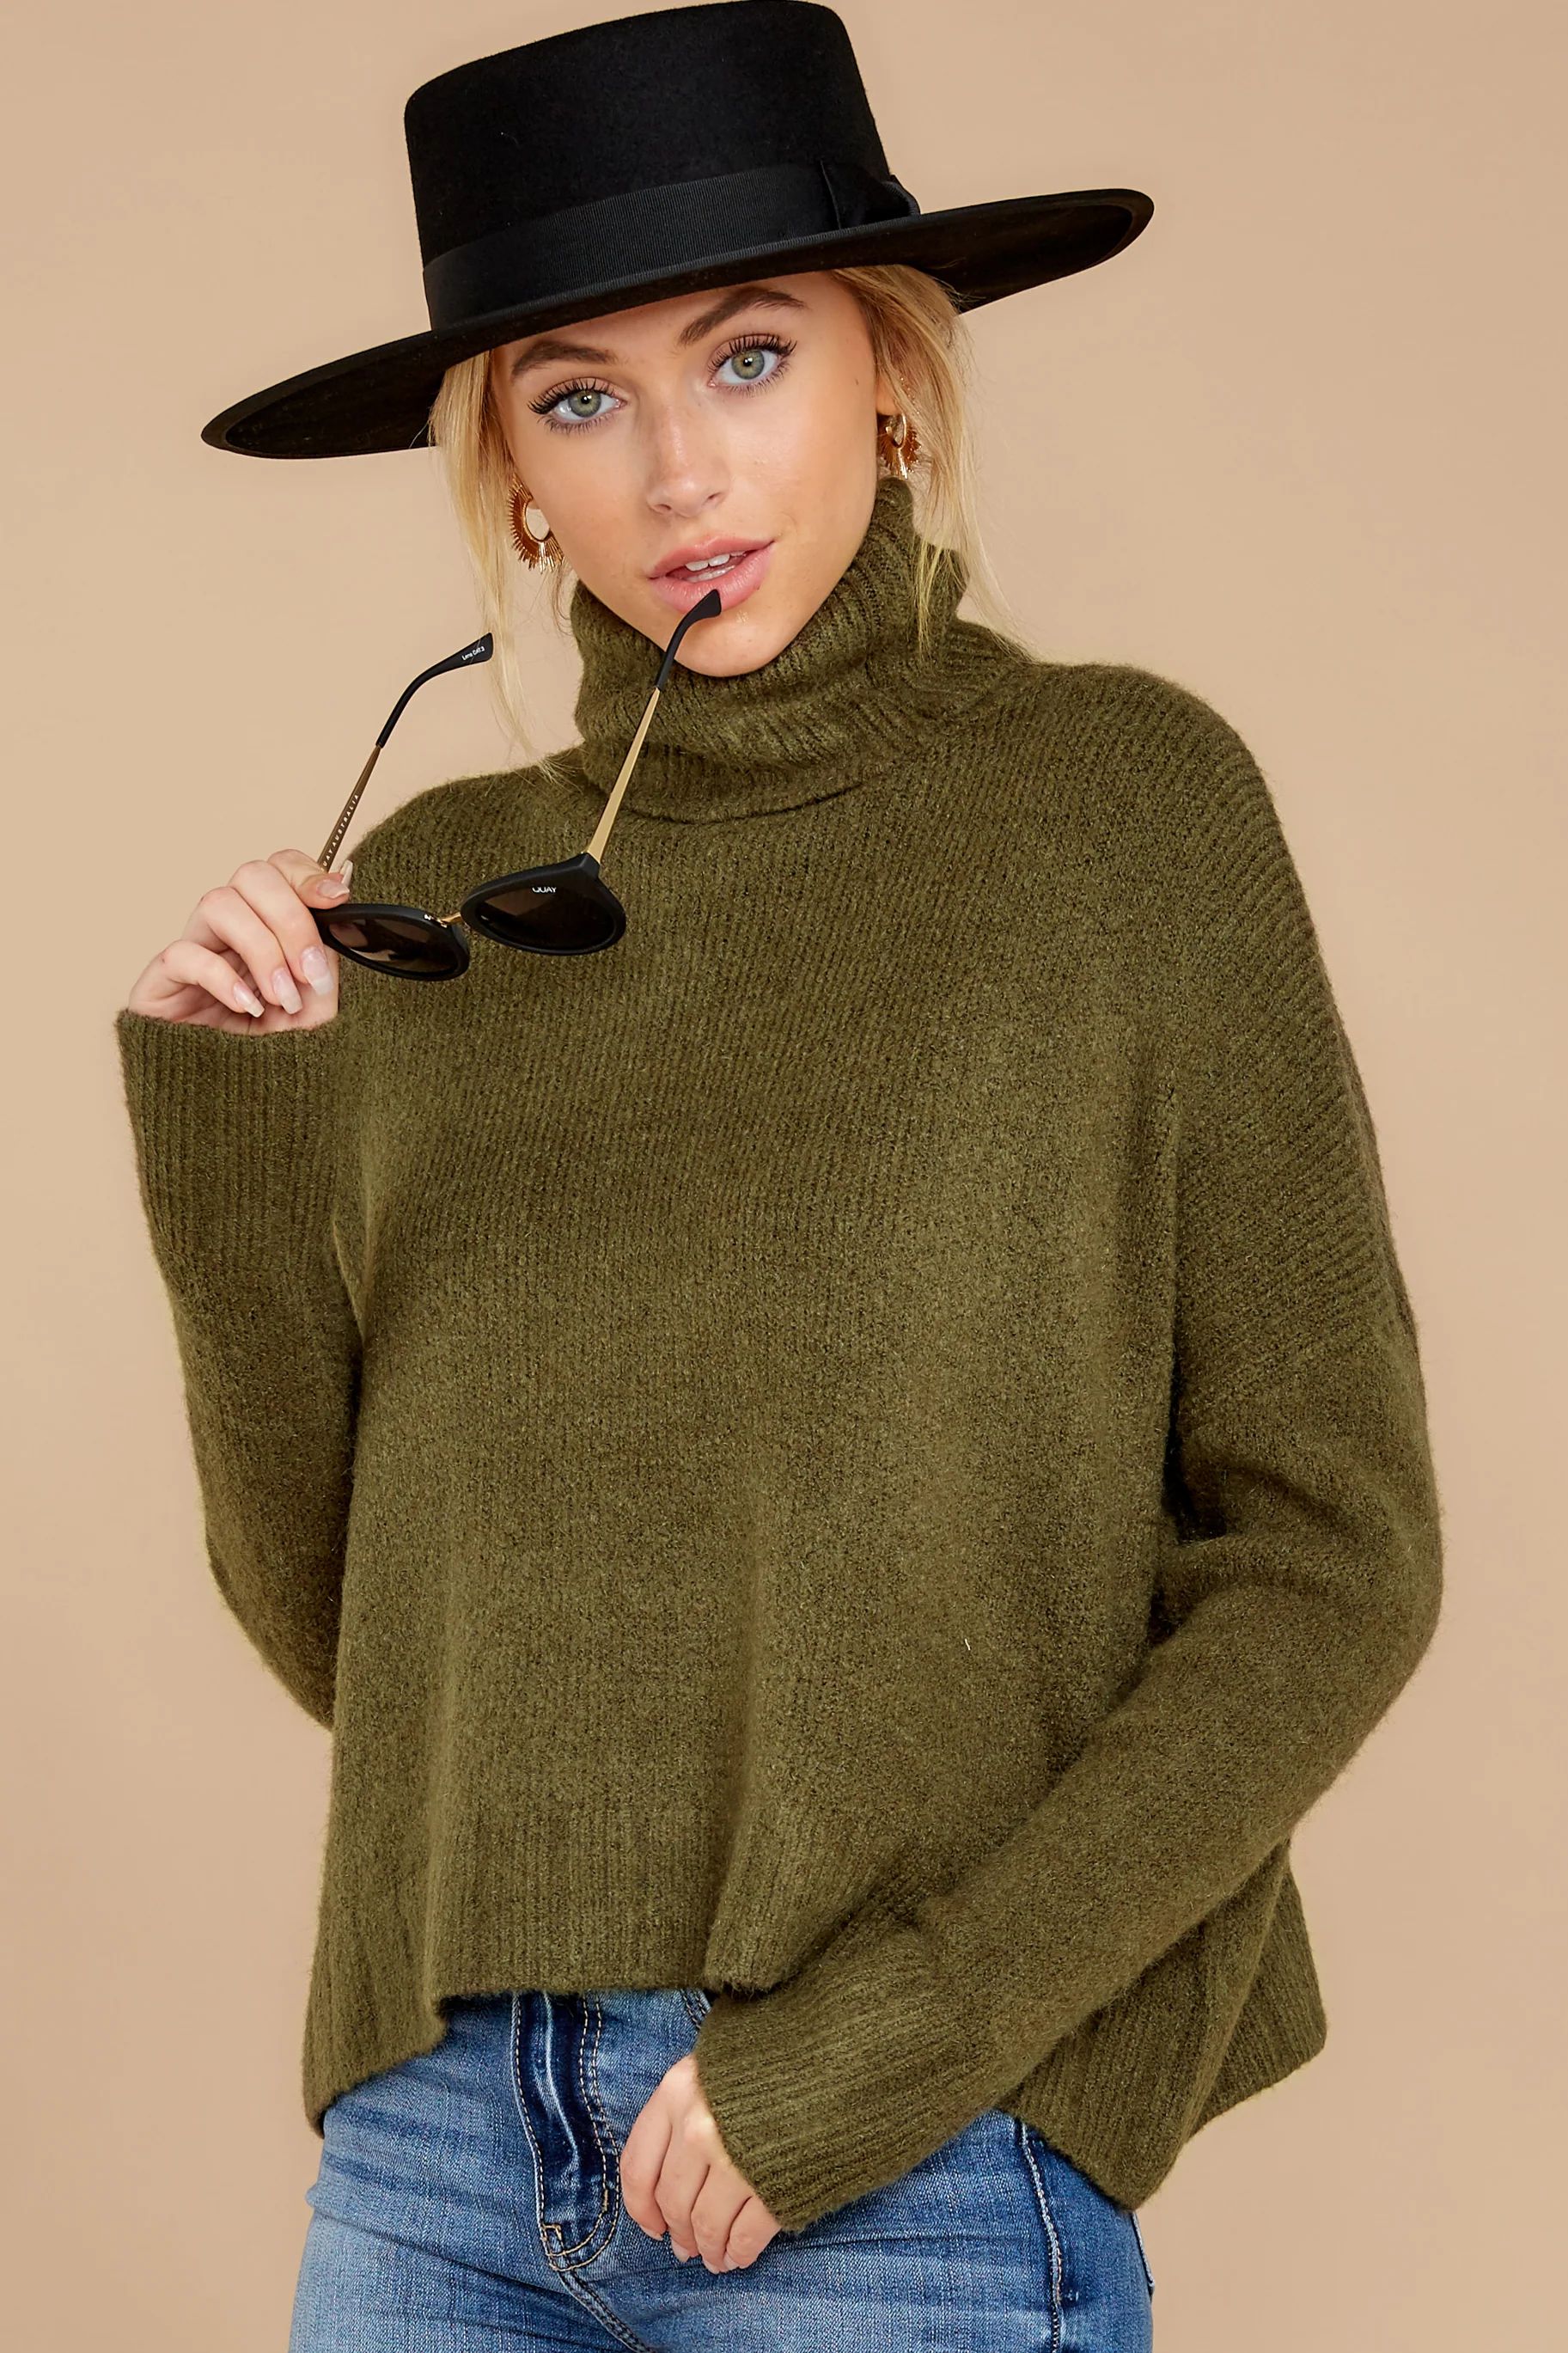 Fable Say Anything Olive Green Turtleneck Sweater | Red Dress 